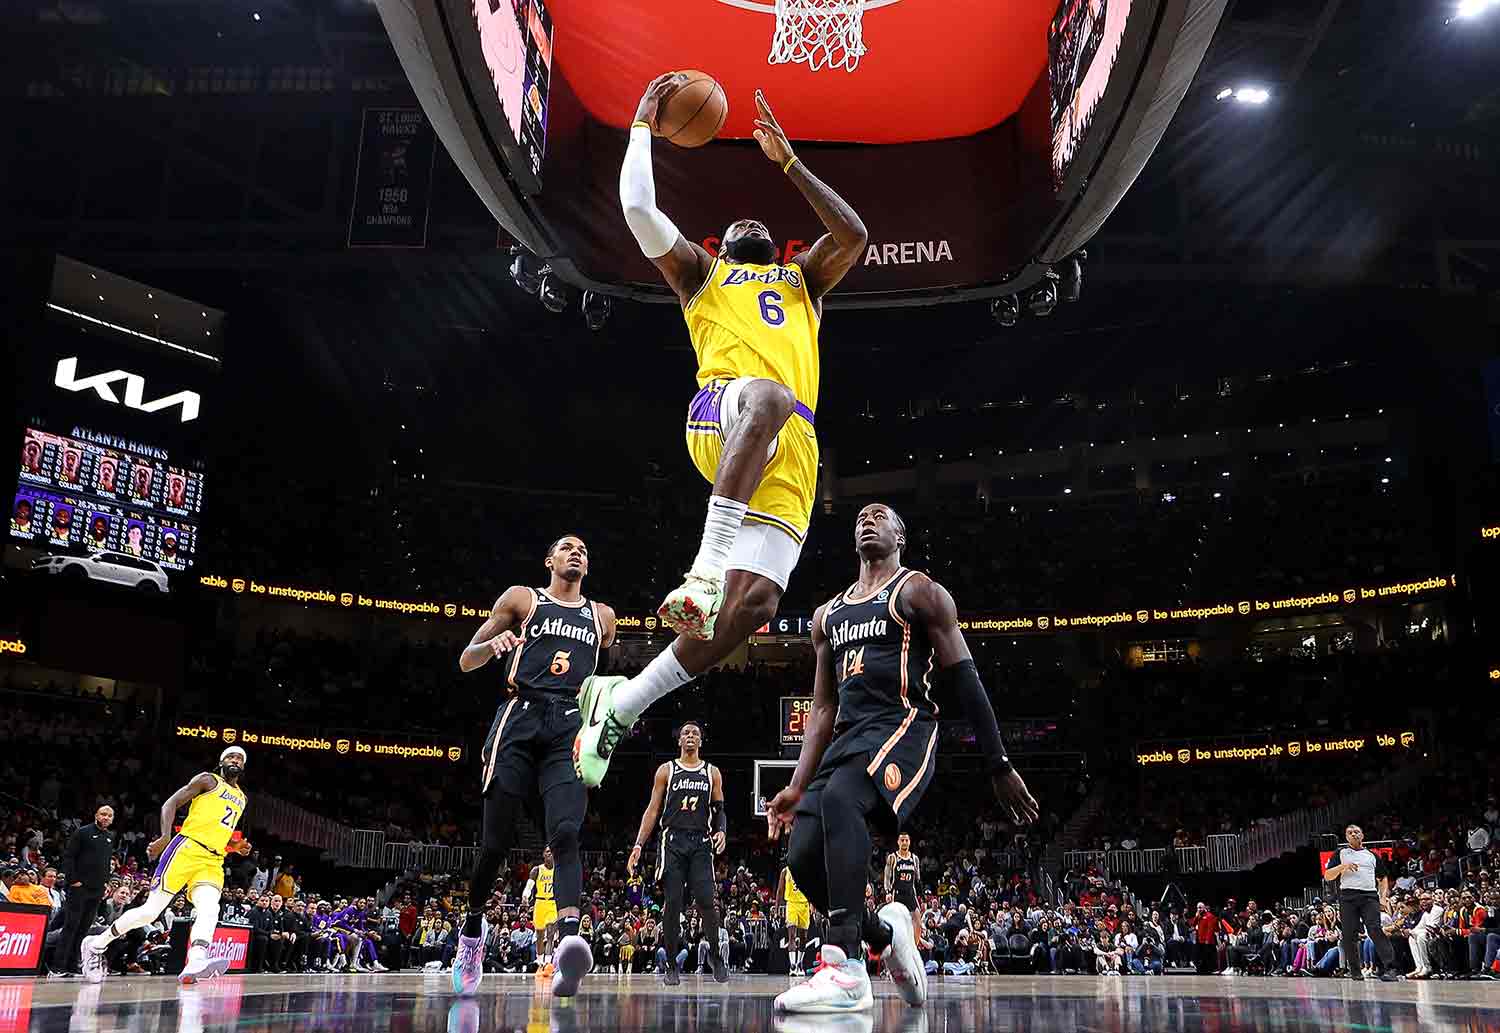 LeBron James hovers in the air about to make a basket as two opponents look on behind him.